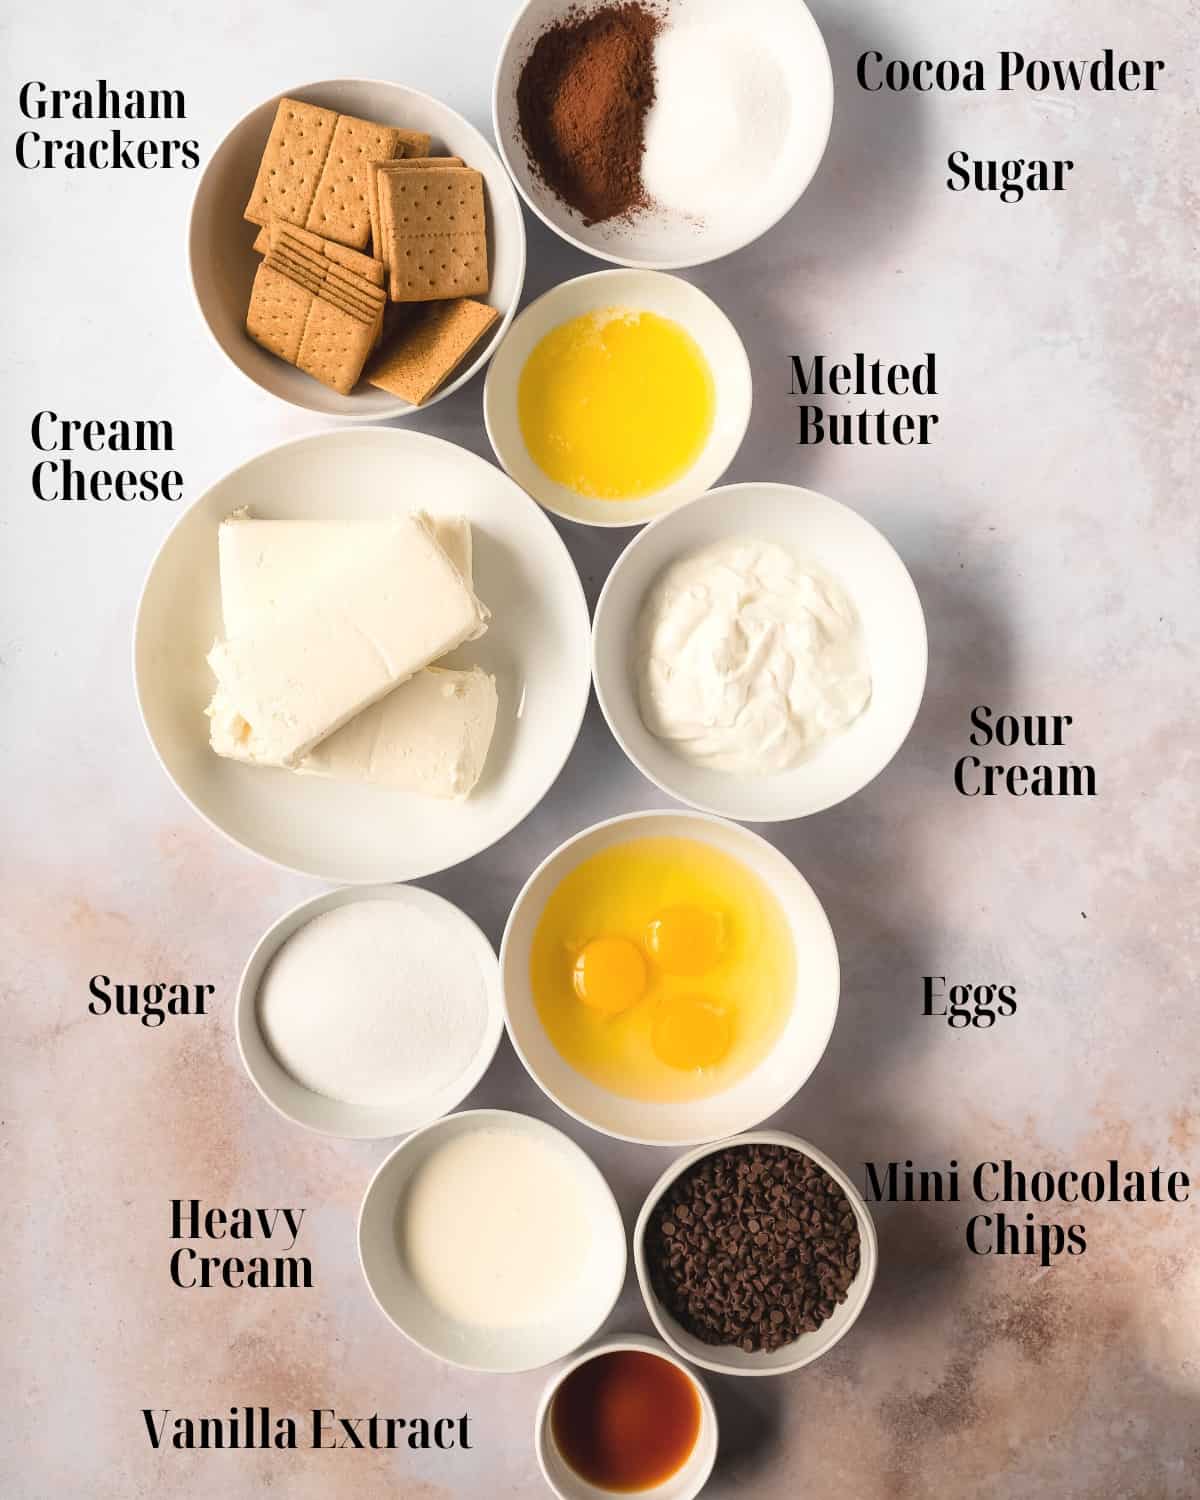 Gather cream cheese, sugar, vanilla extract, sour cream, heavy cream, eggs and mini chocolate chips, graham cracker, cocoa powder and melted butter.